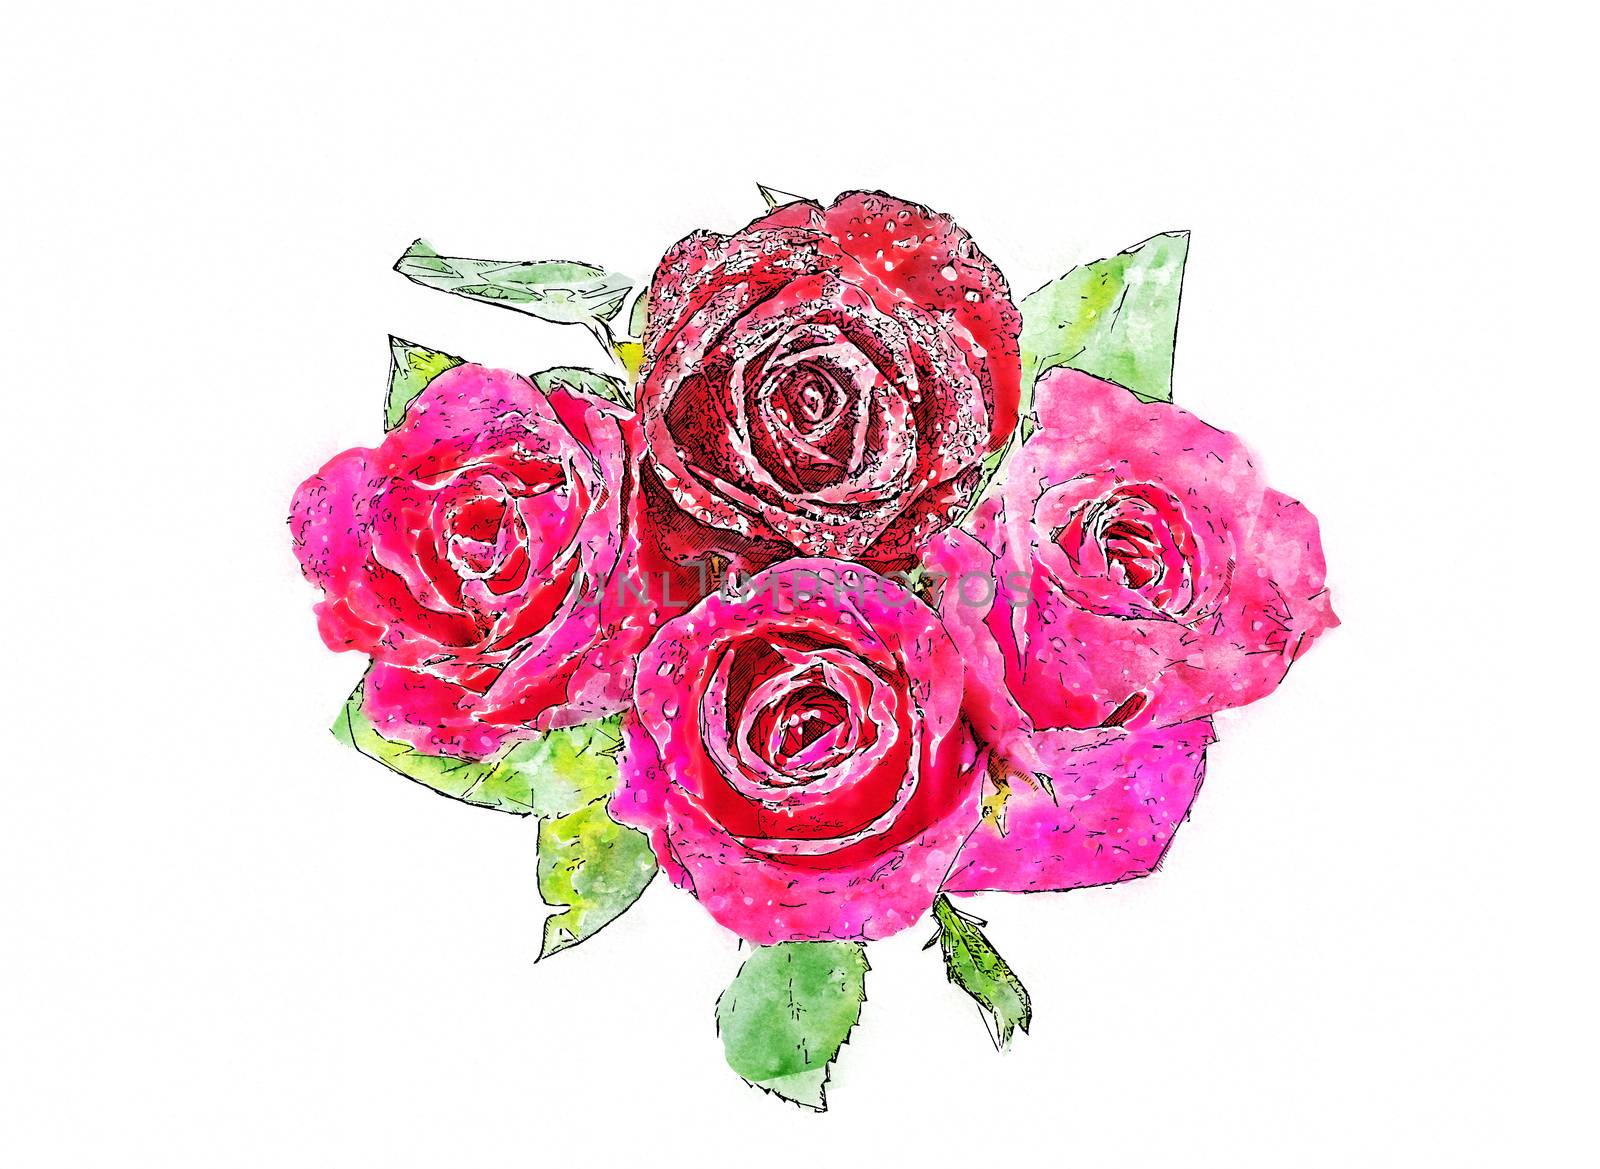 Watercolor of Rose isolated over white.